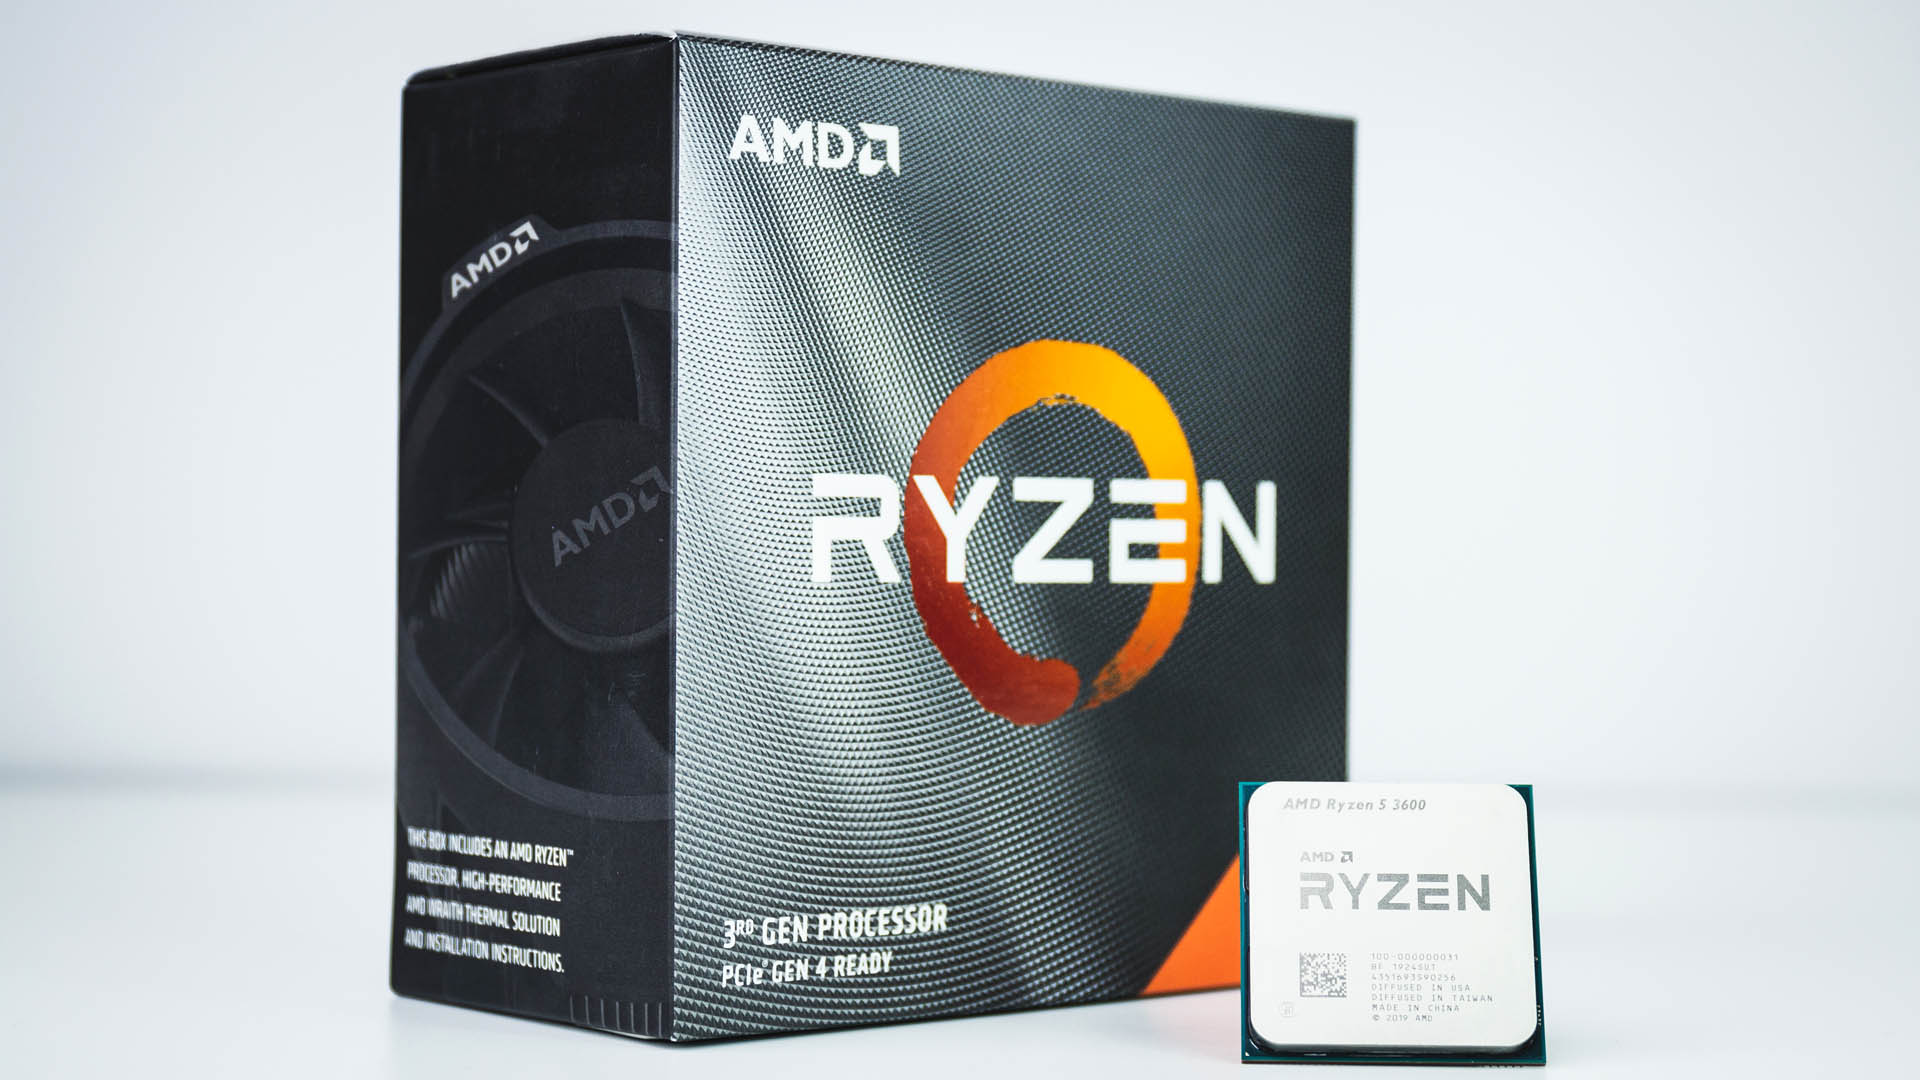 In case you missed it, the AMD Ryzen 5 3600 is on sale at an all